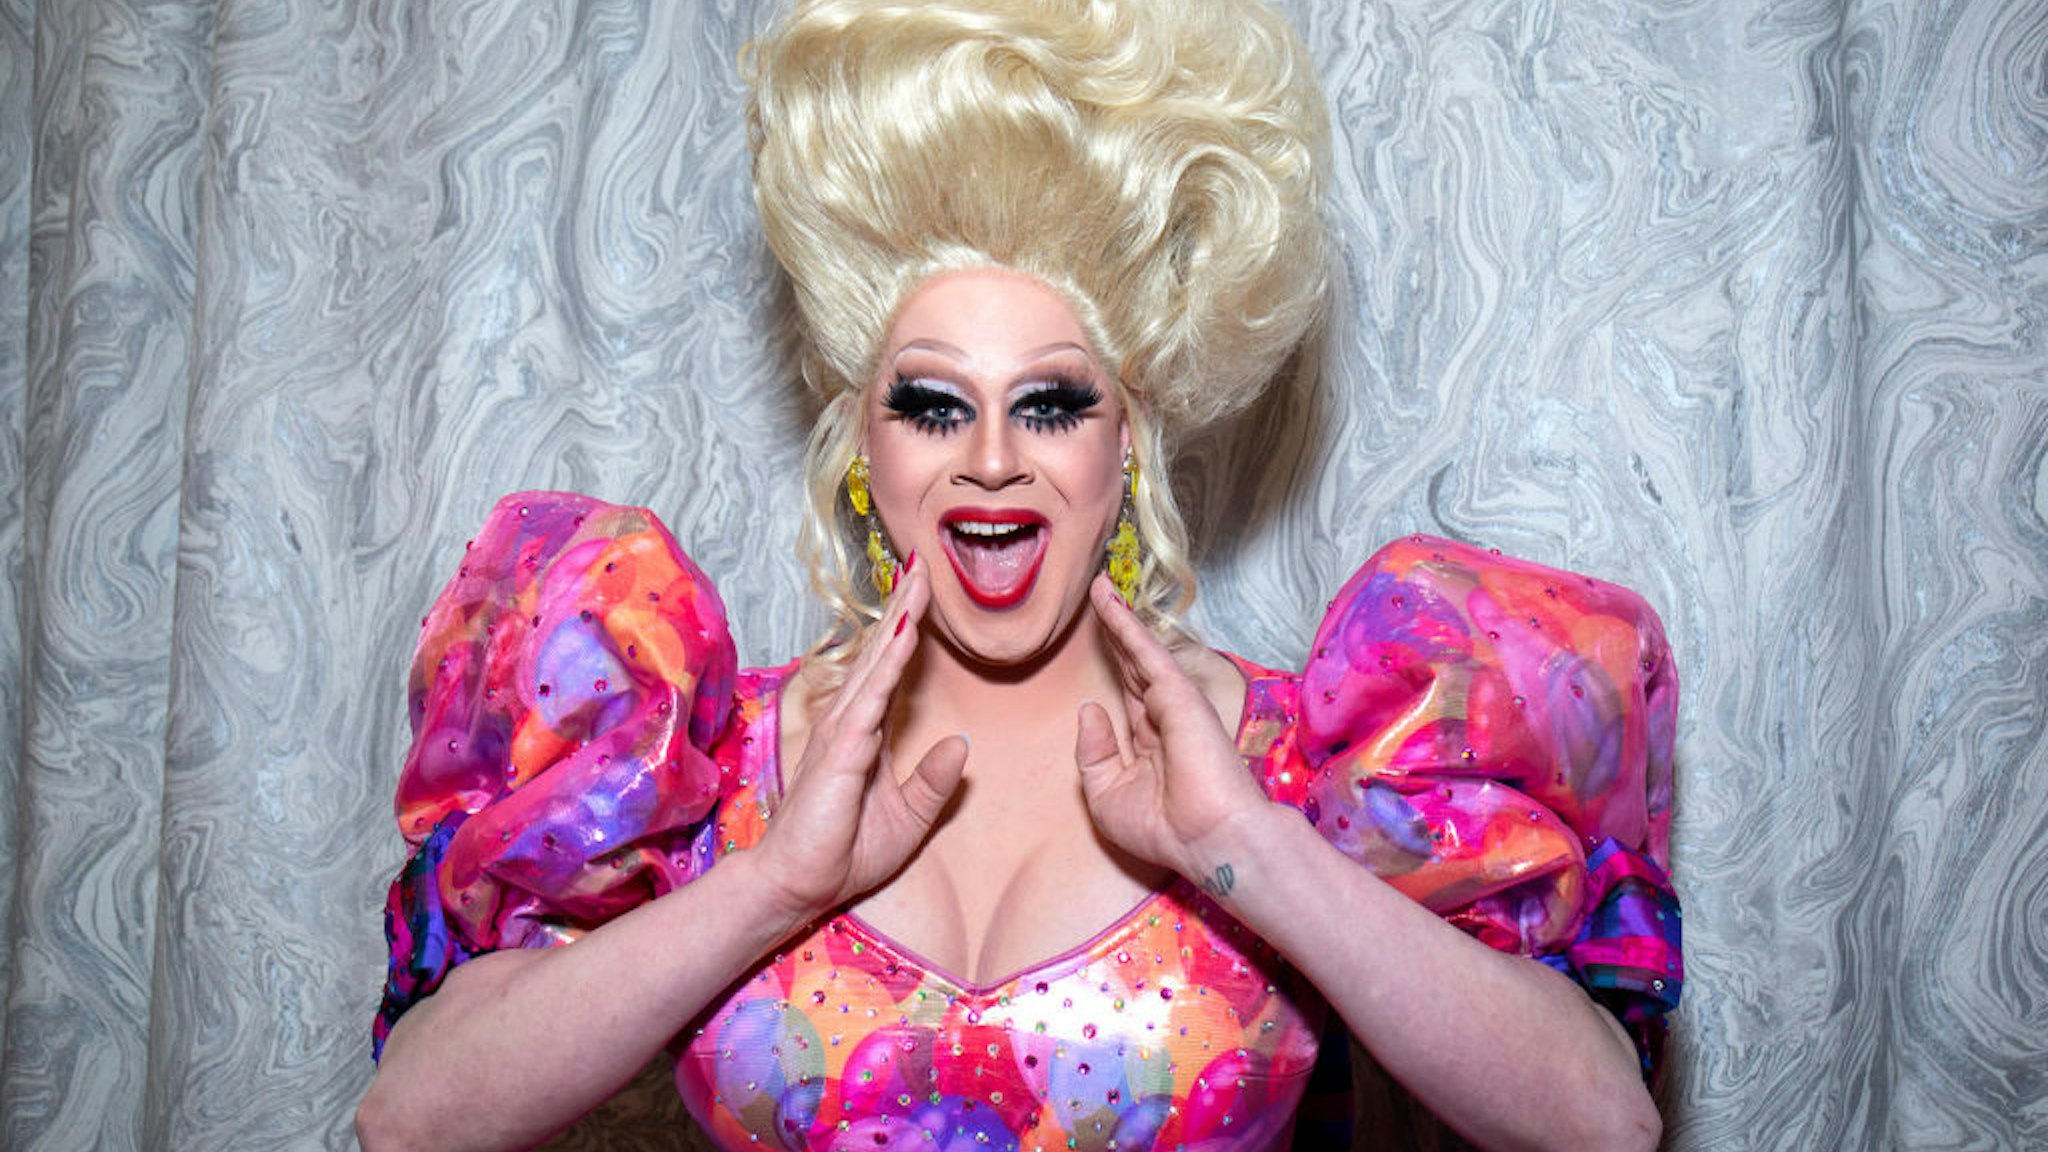 NEW YORK, NEW YORK - FEBRUARY 20: Nina West of the cast of 'RuPaul's Drag Race Season 11' visits Build Studio on February 20, 2019 in New York City. (Photo by Santiago Felipe/Getty Images)